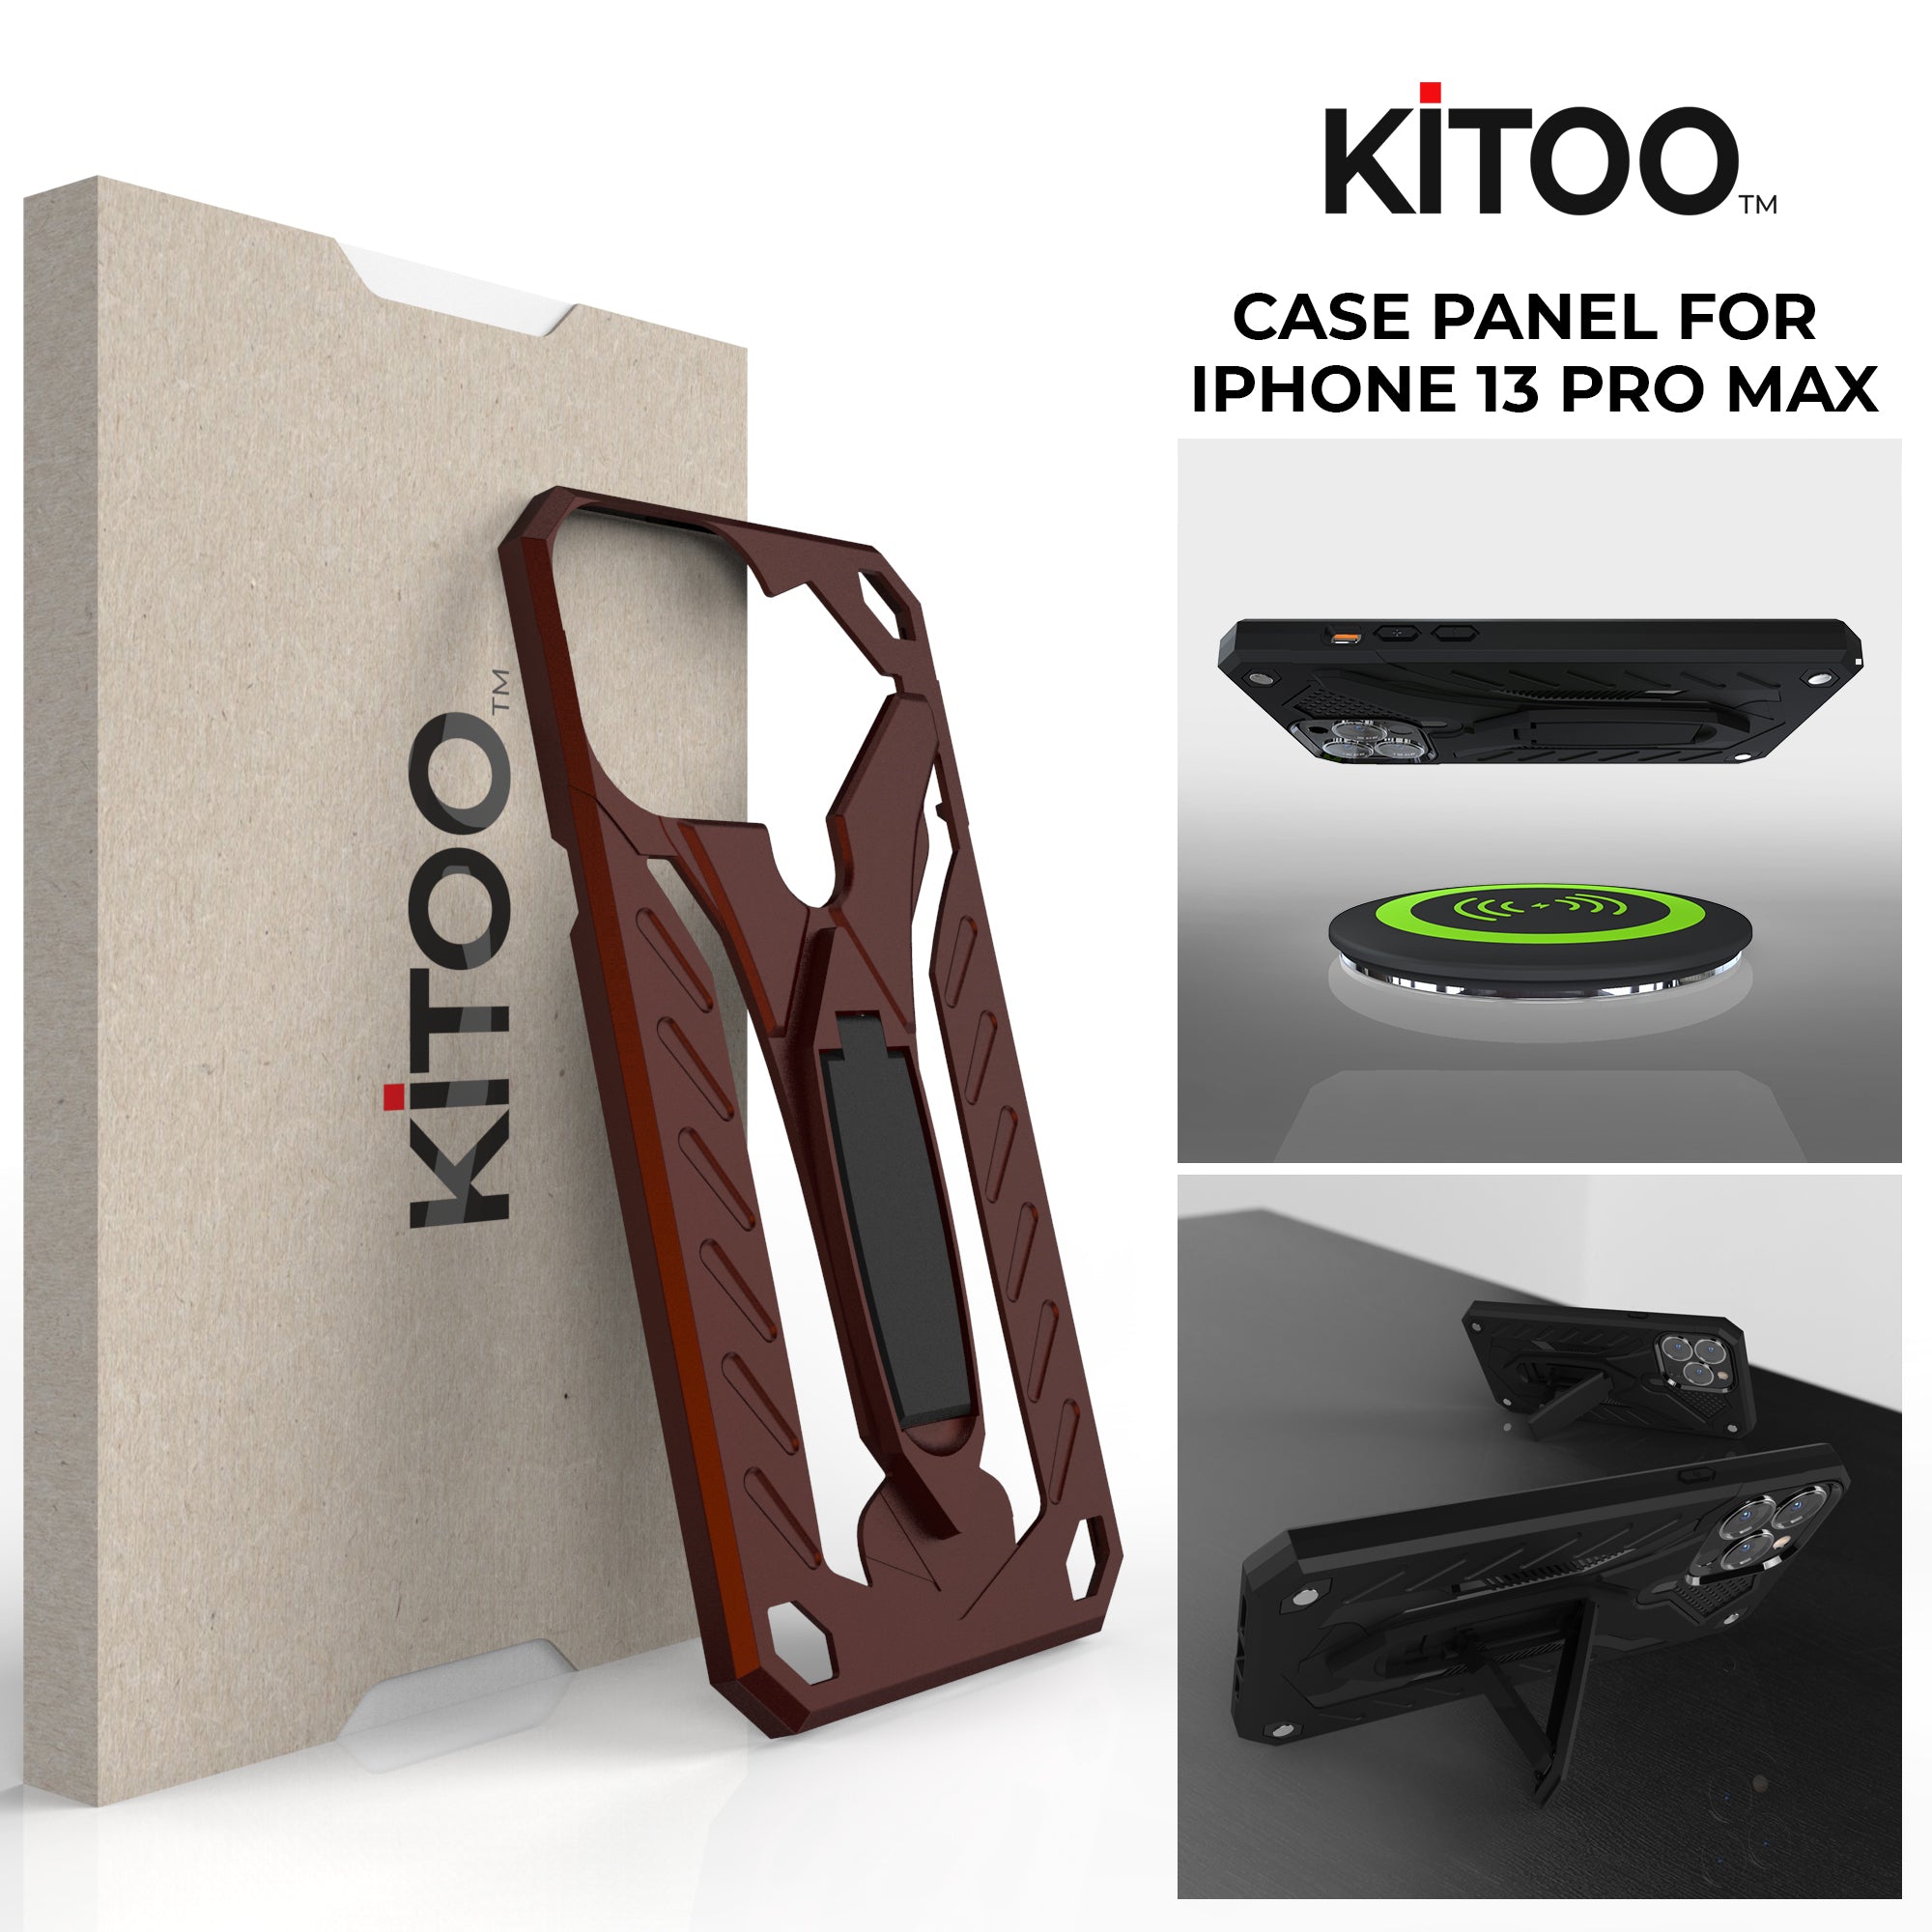 Kitoo Kiсkstand Panel Designed for iPhone 13 Pro Max case (Spare Part only) - Red